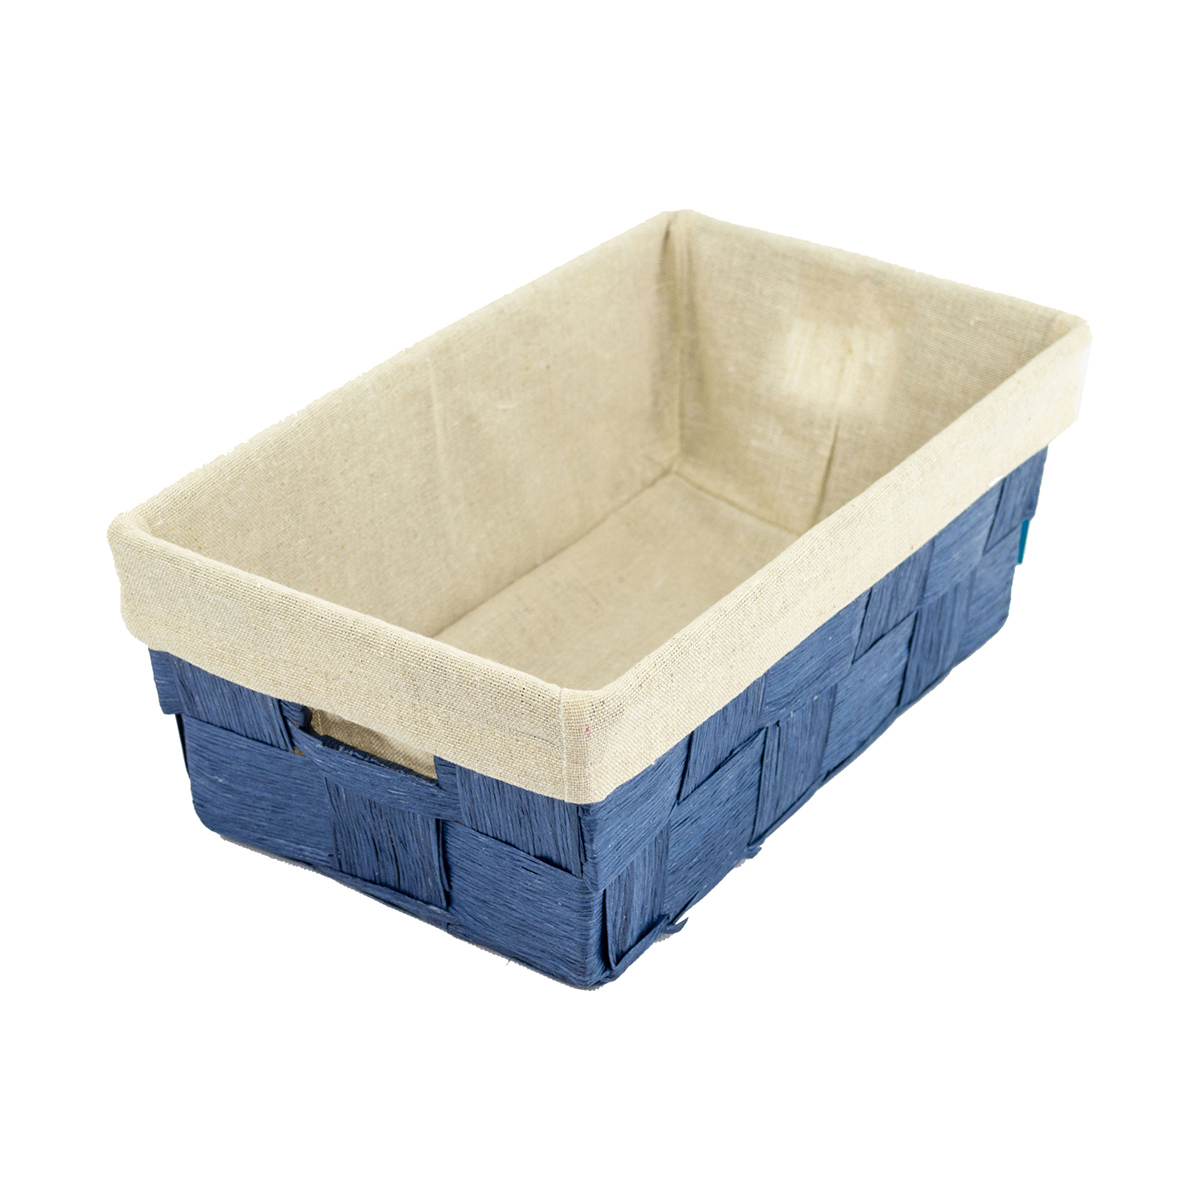 Honey Can Do Blue Storage Tray 11.4IN X 6.5IN